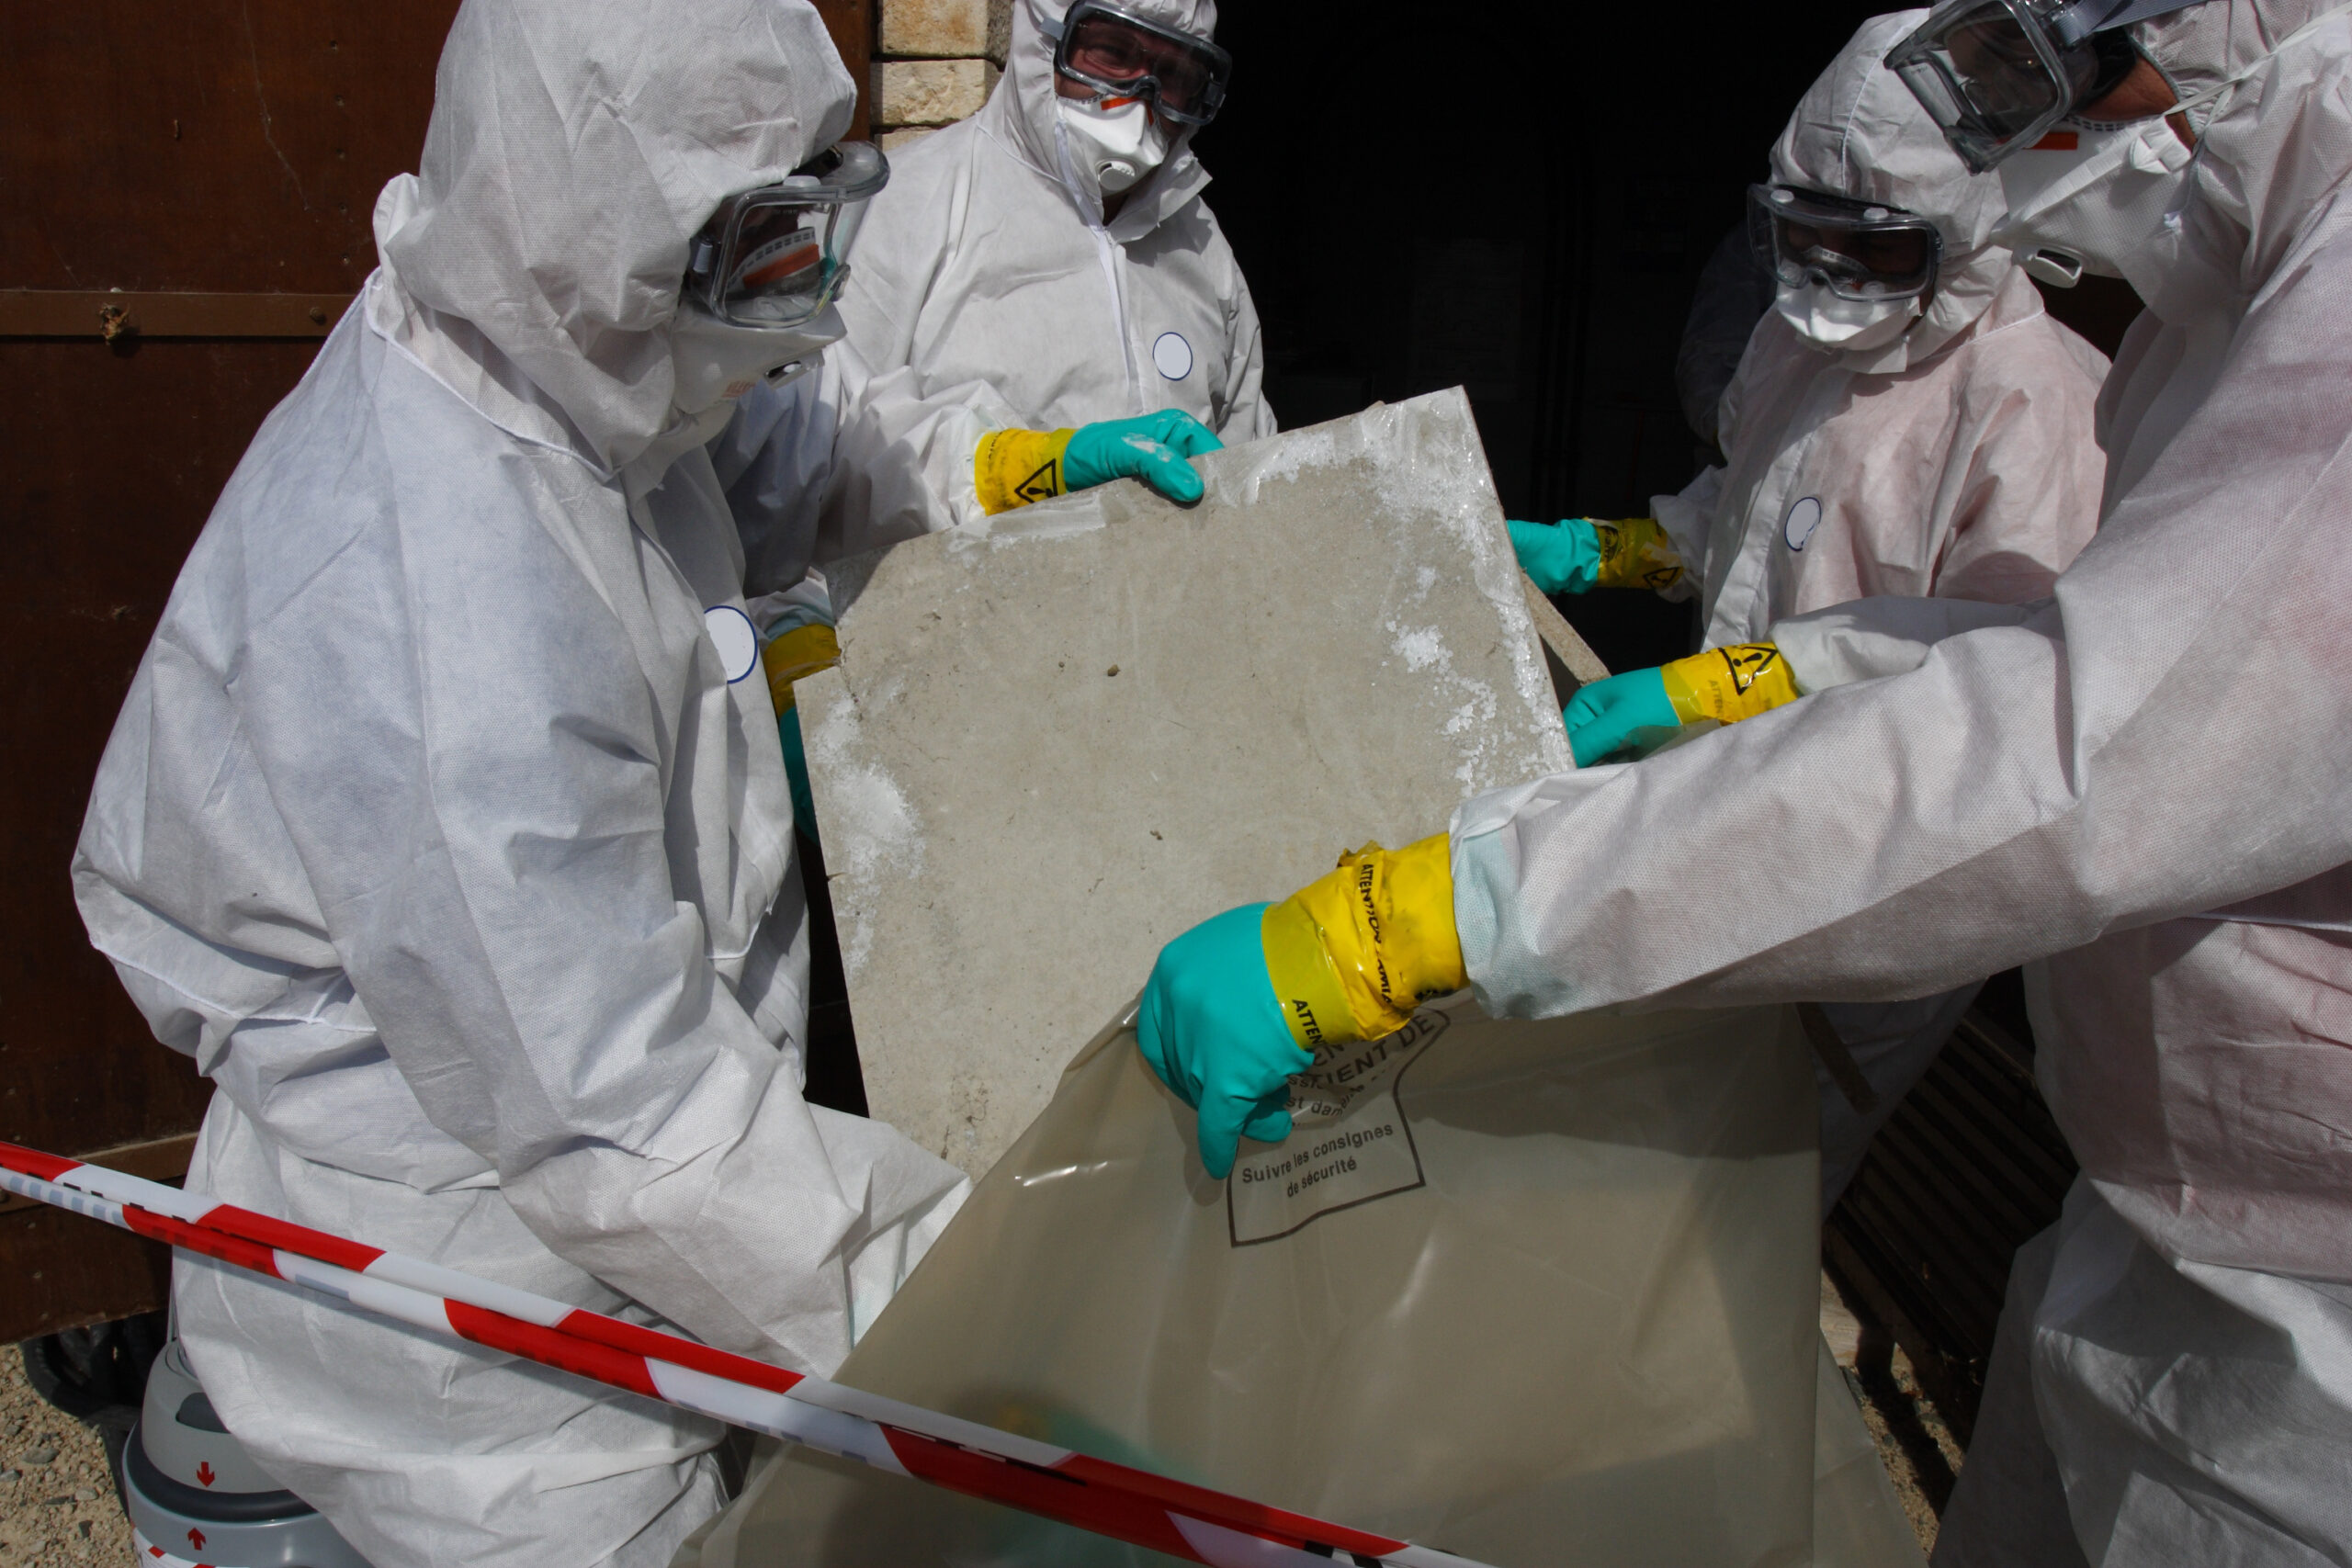 Workers in hazmat suits removing materials that contain asbestos fibers